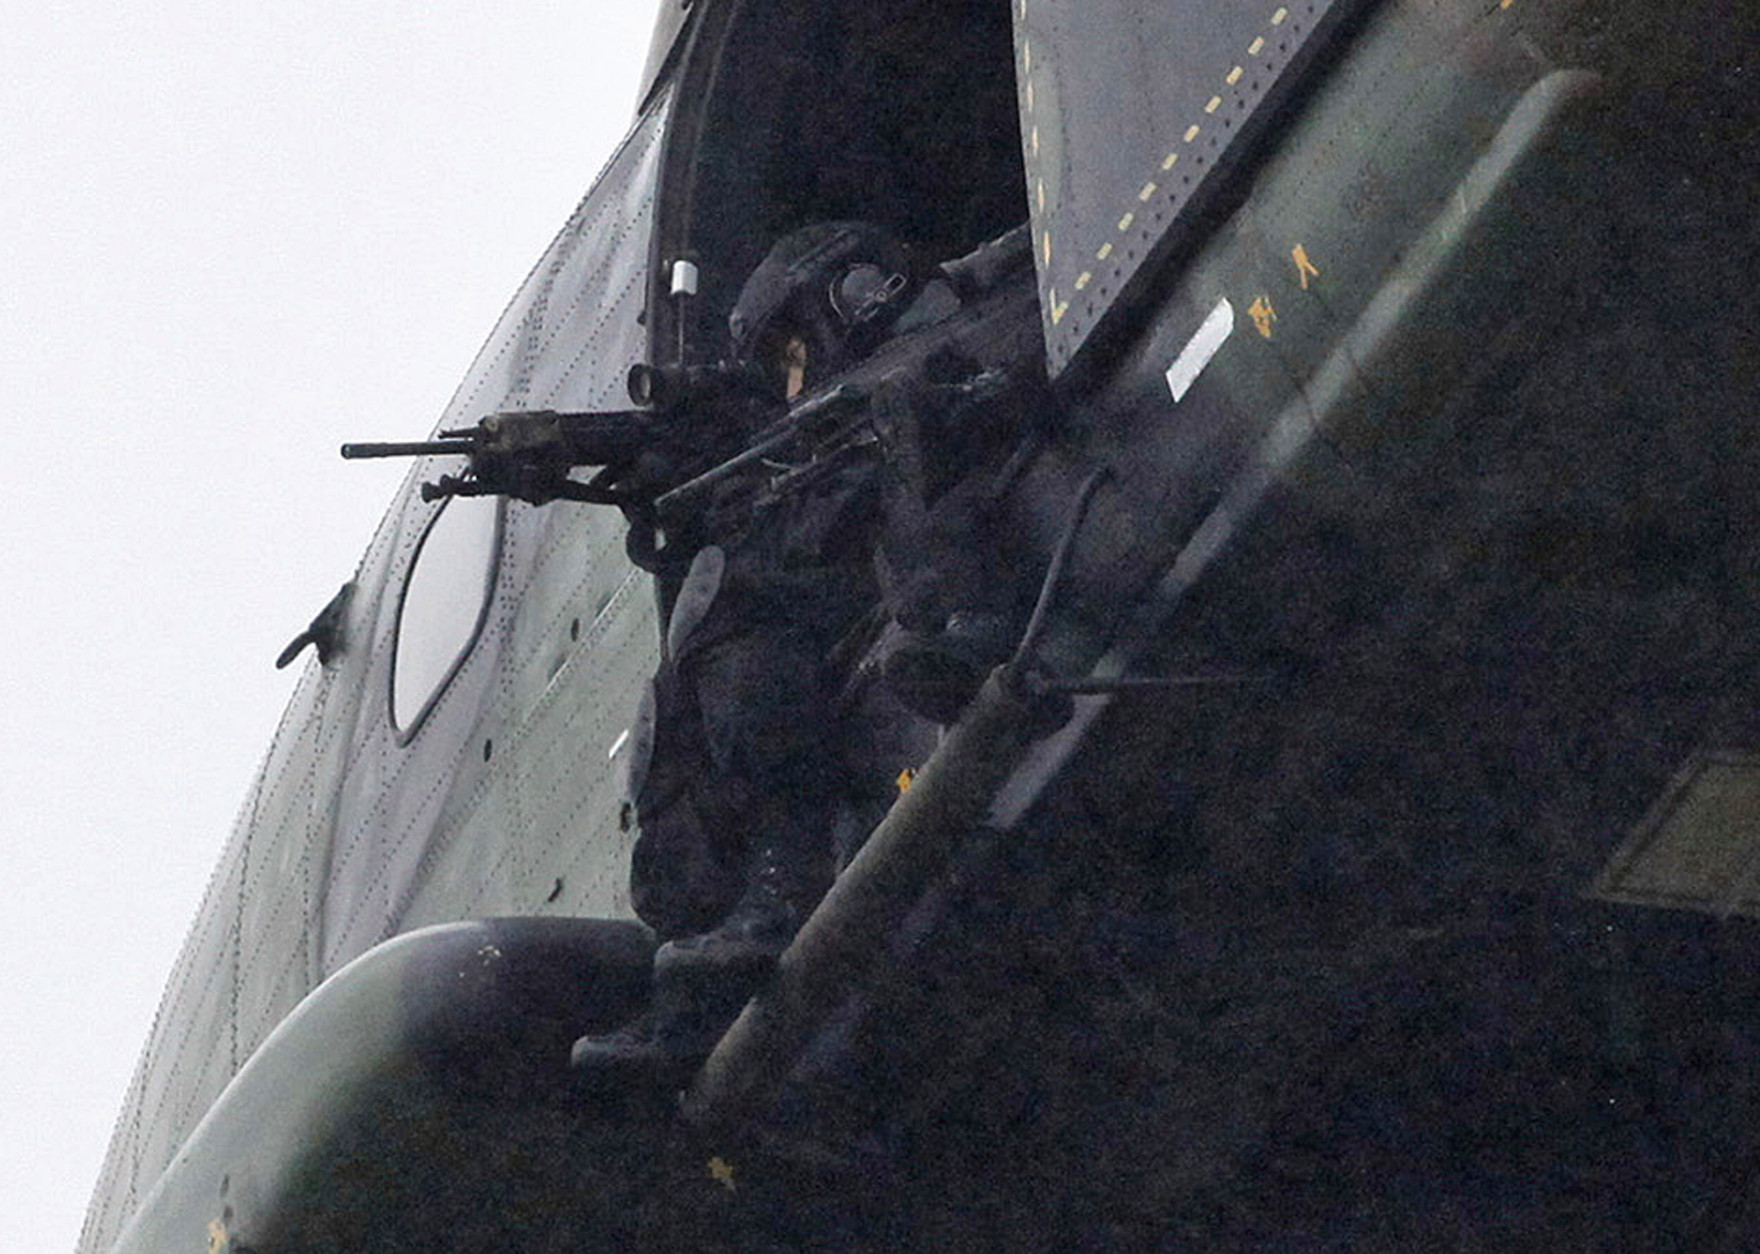 Armed security forces fly overhead in a military helicopter  in Dammartin-en-Goele, northeast of Paris, Friday Jan. 9, 2015.   French security forces swarmed this small industrial town northeast of Paris Friday in an operation to capture a pair of heavily armed suspects in the deadly storming of a satirical newspaper. (AP Photo/Thibault Camus)